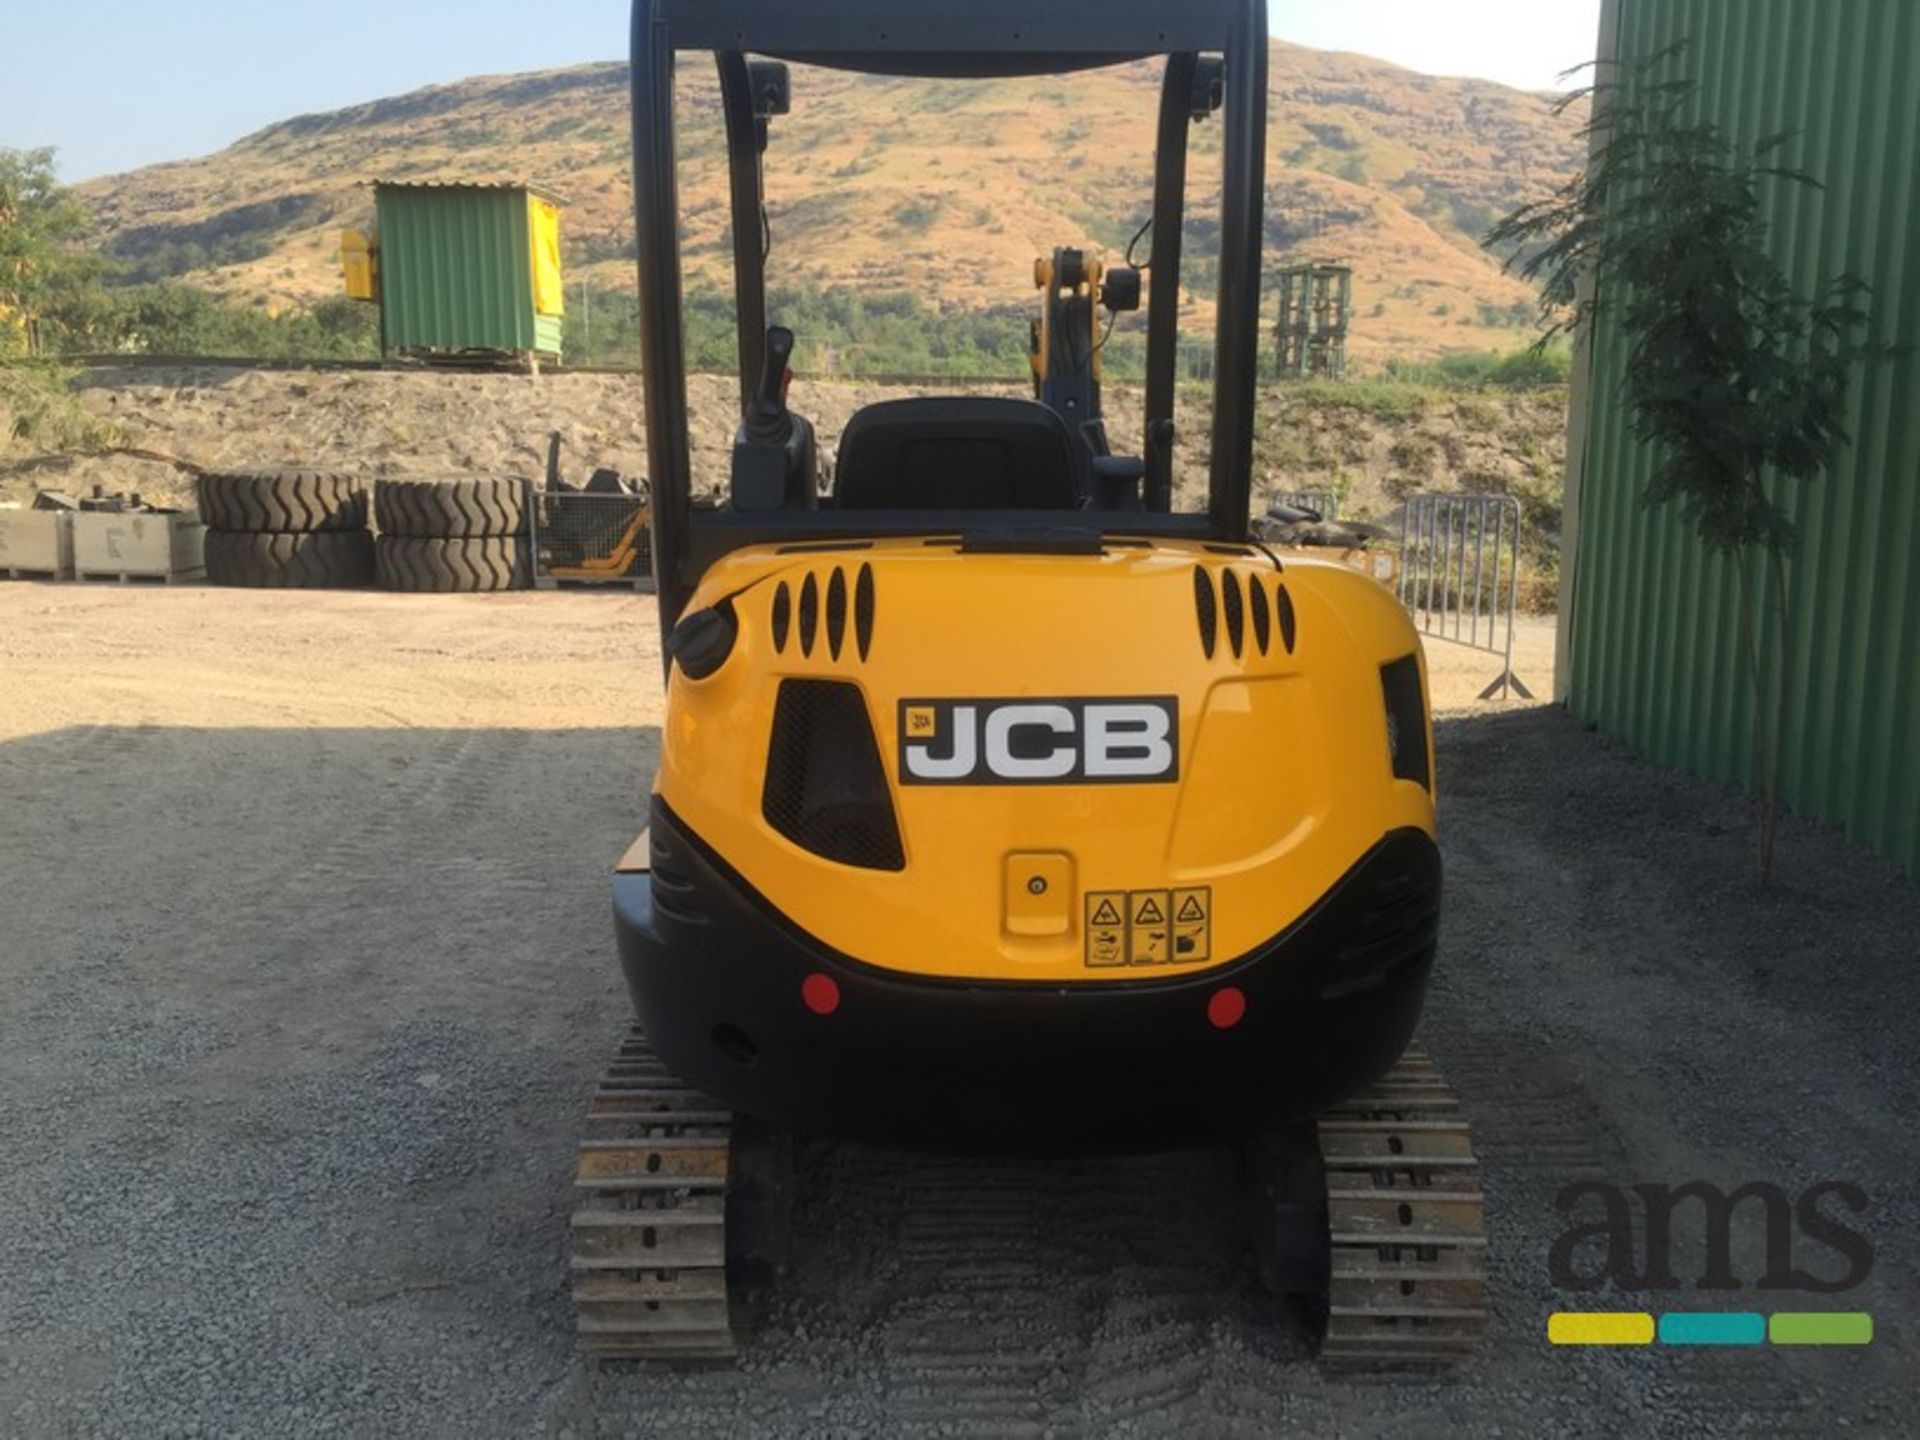 *FOR EXPORT ONLY* 2014, JCB 8026CTS Excavator, Serial No. 305249 c/w Steel Tracks, Single Auxiliary, - Image 5 of 18